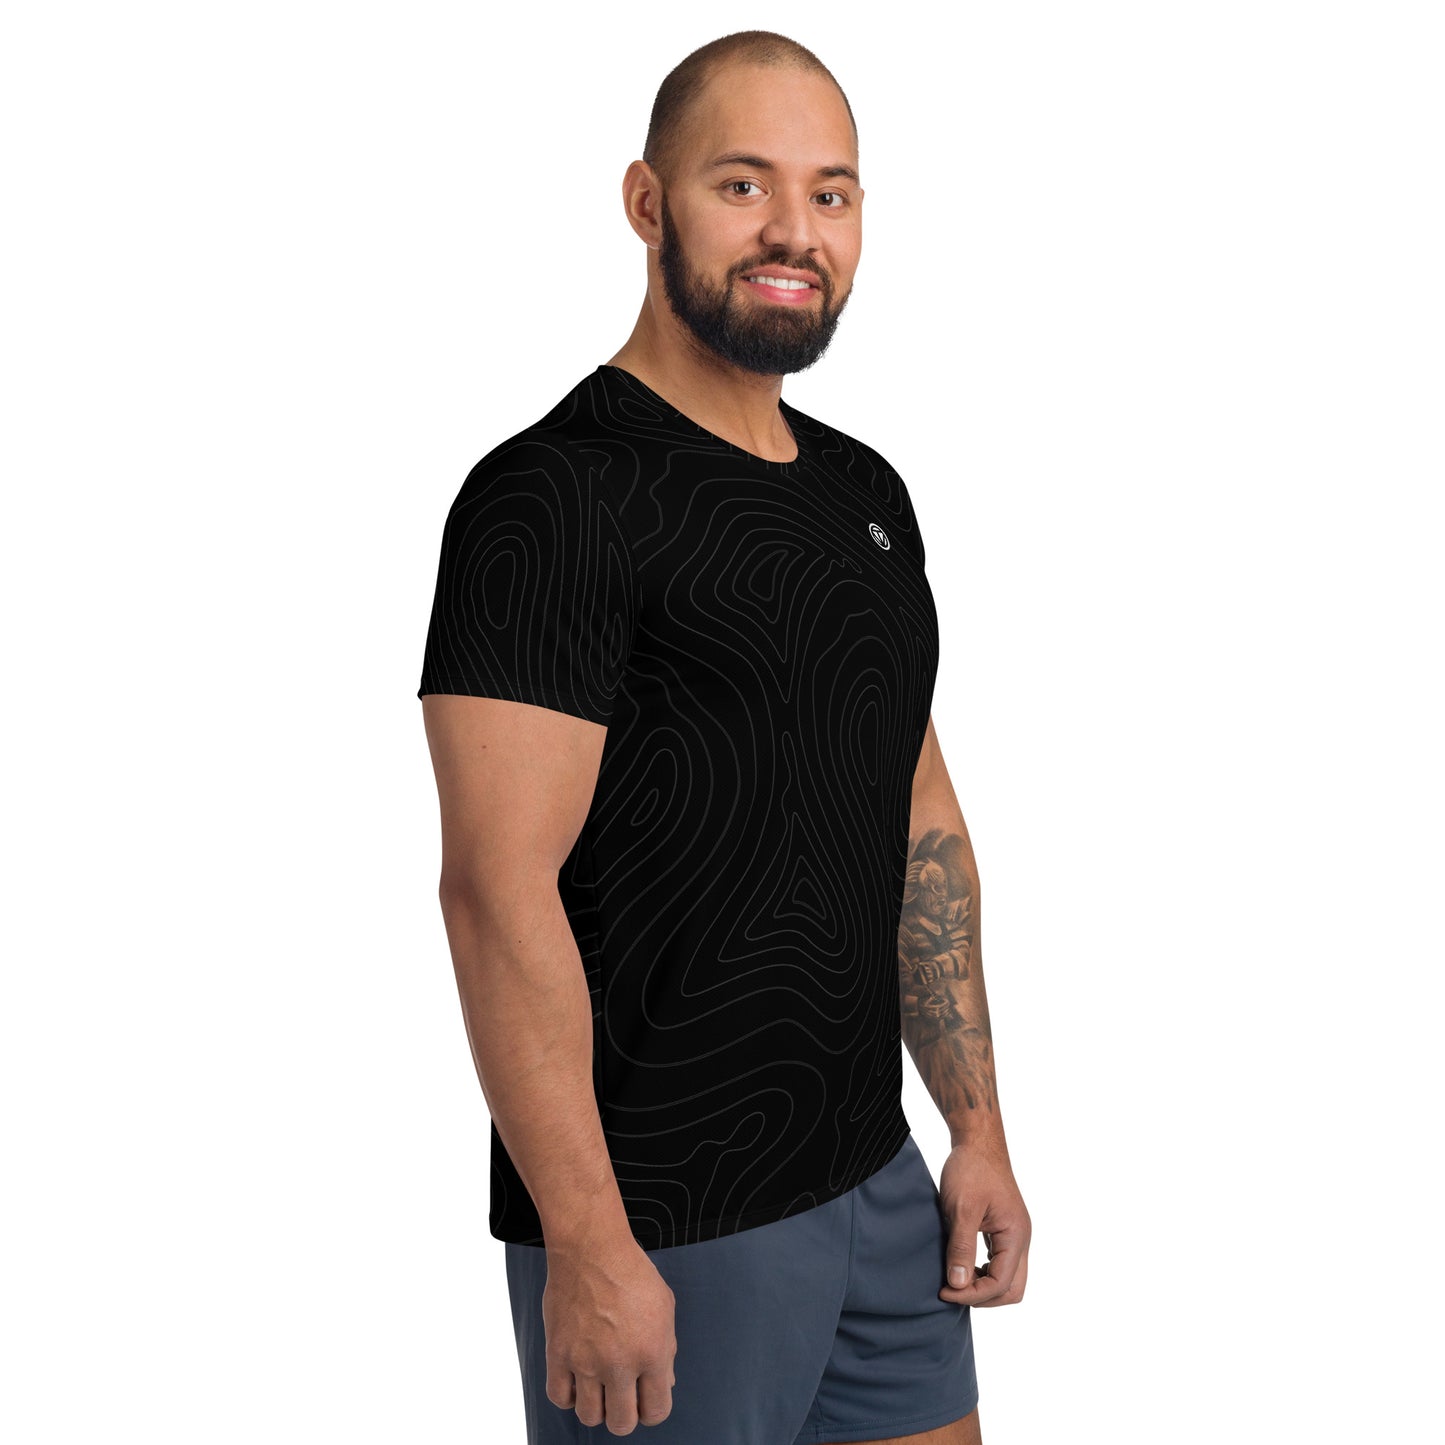 TIME OF VIBES - Men's Athletic T-shirt MOVE PUR (Black) - €45.00